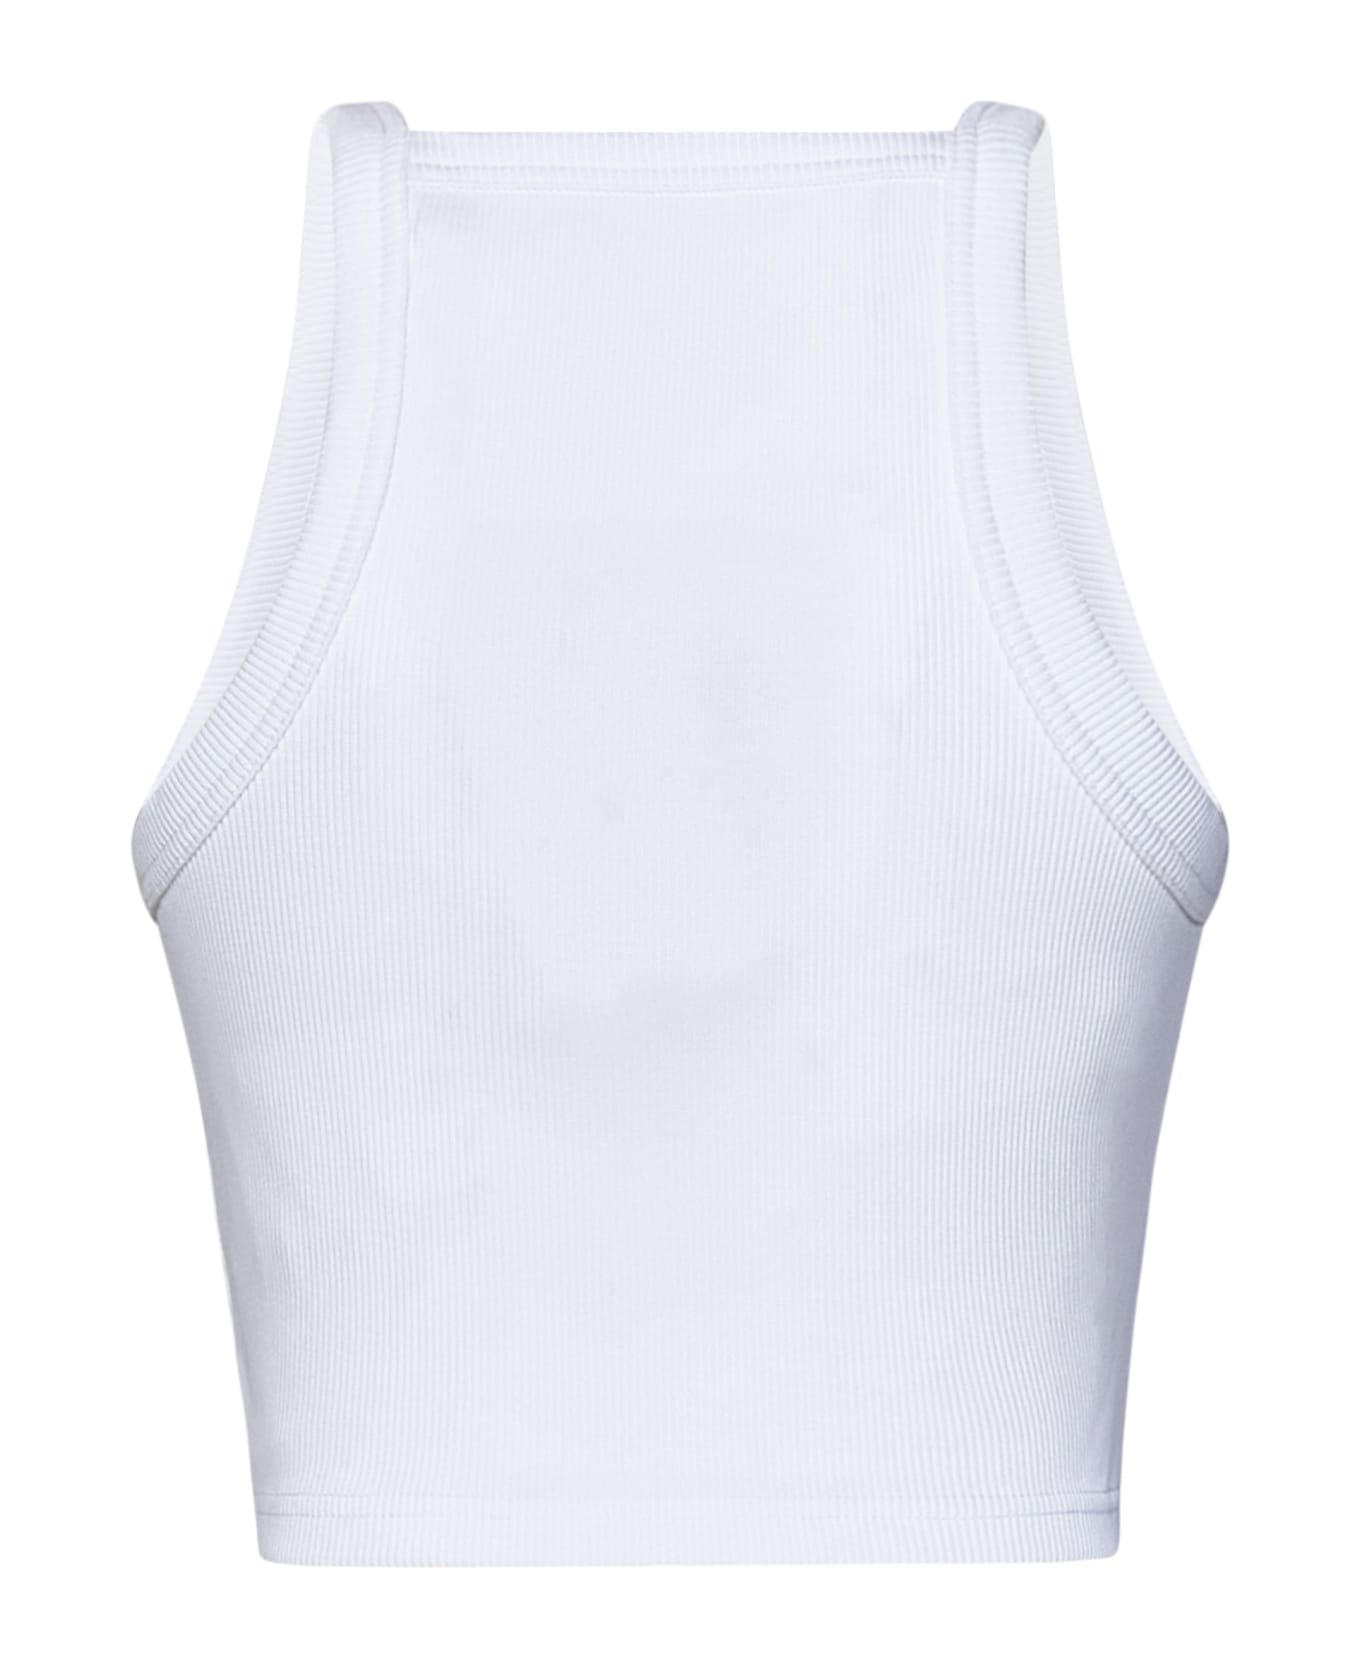 Givenchy Top - White